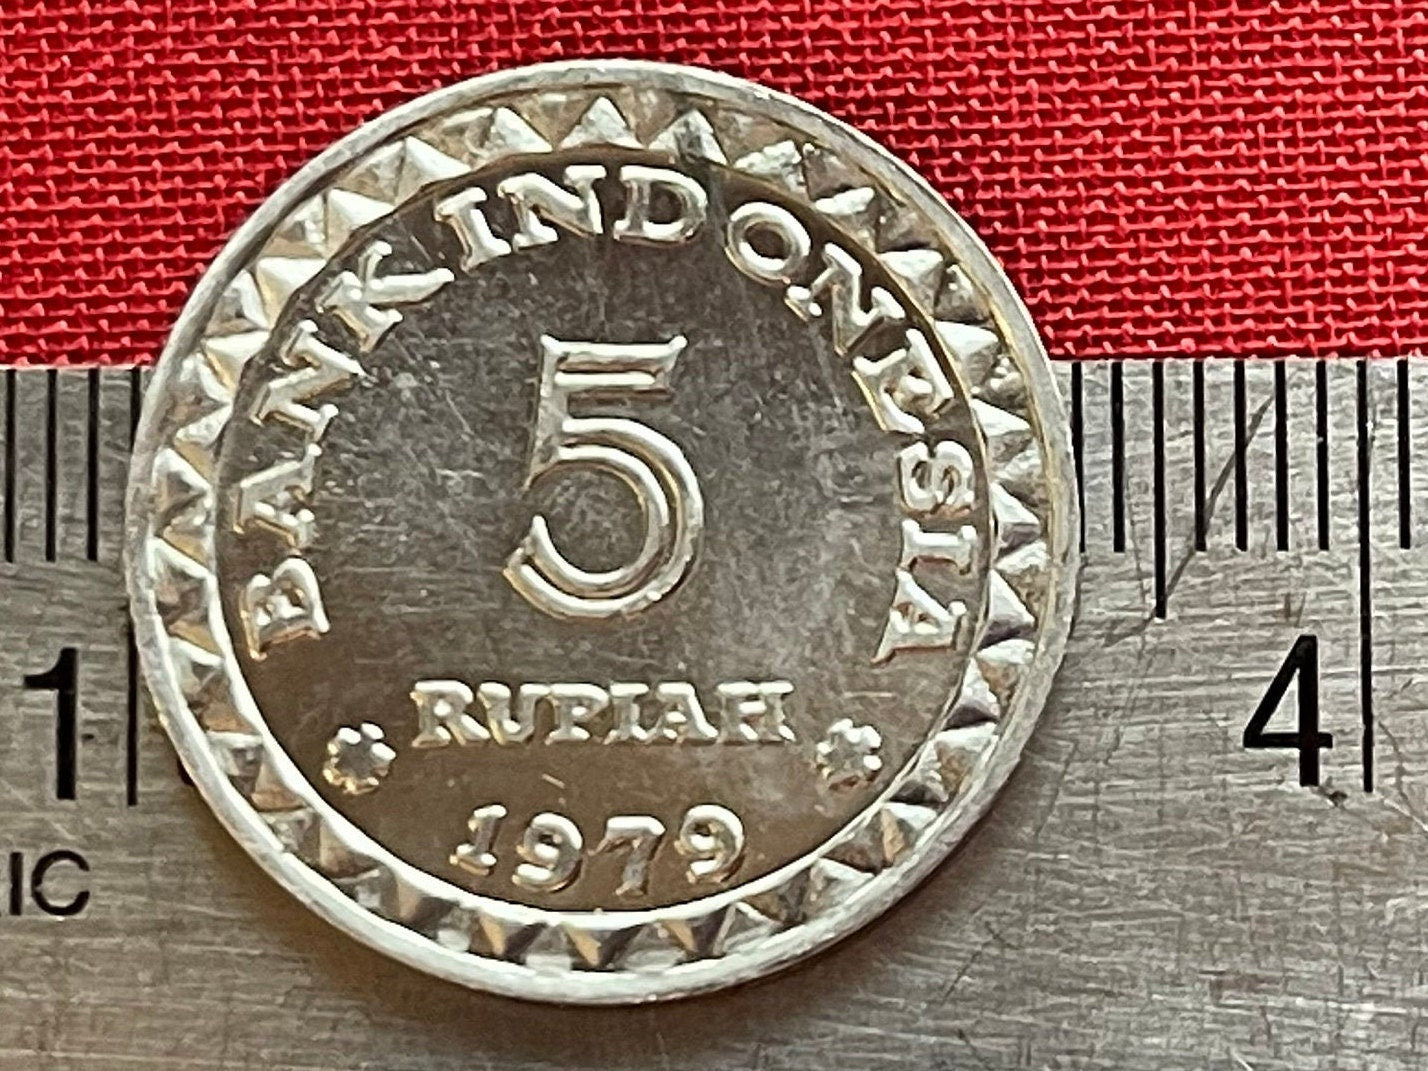 Perfect Family Two Children Are Enough Campaign 5 Rupiah Indonesia Authentic Coin Money for Jewelry and Craft Making (Family Planning)